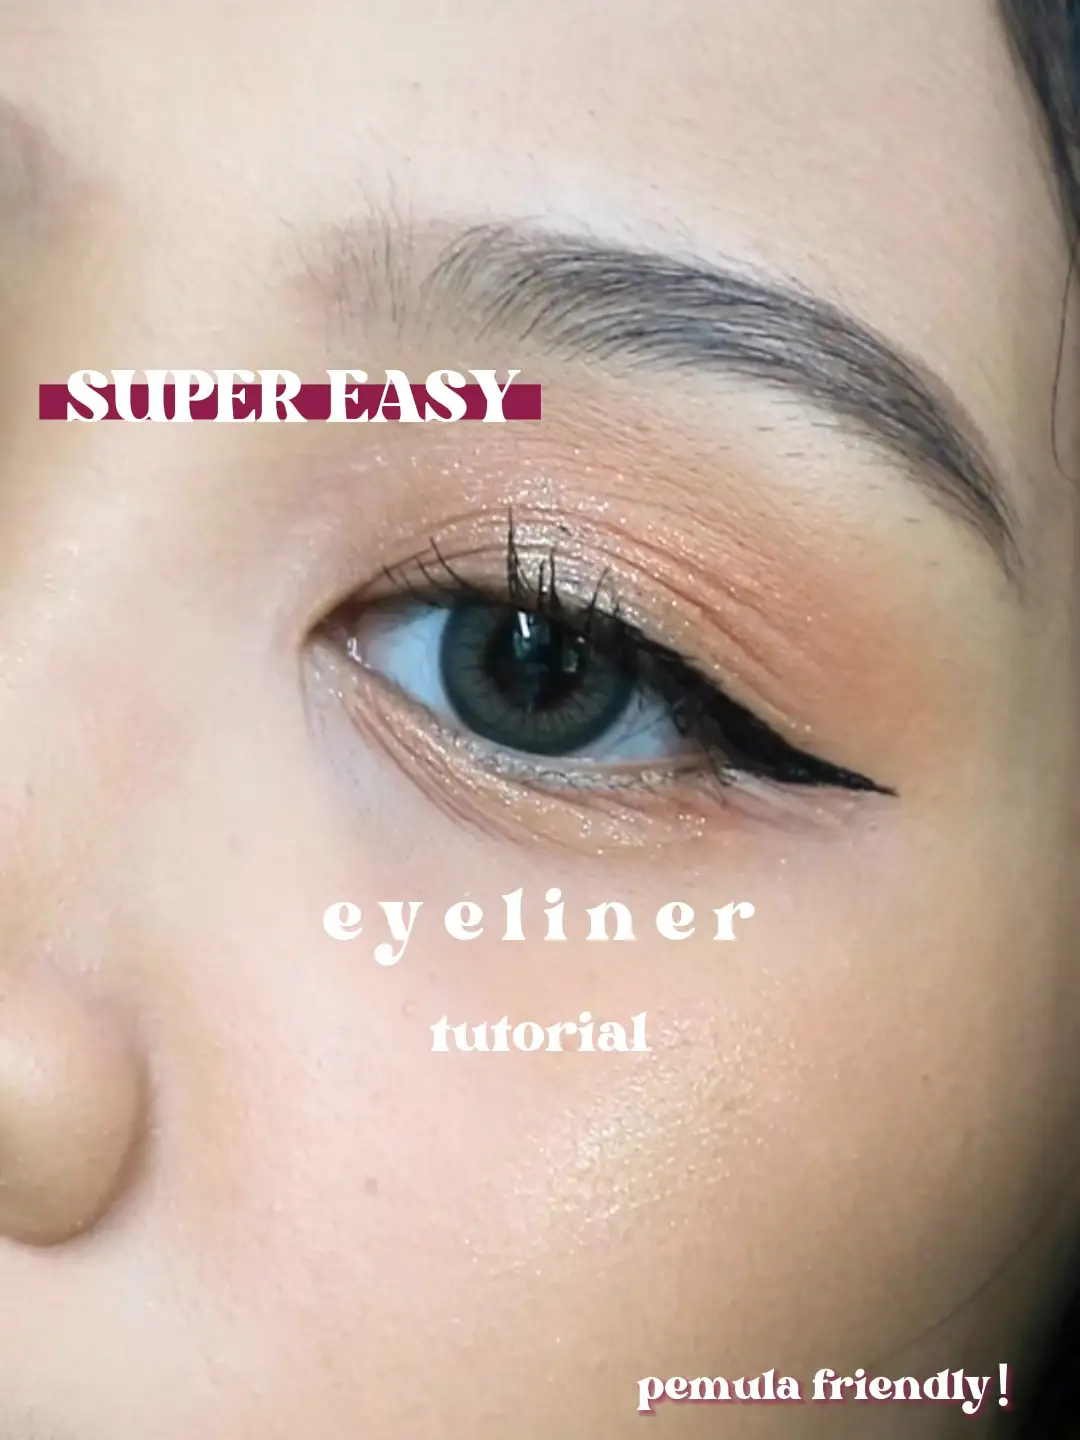 Tutorial on how to use water activated eyeliners: Beginner